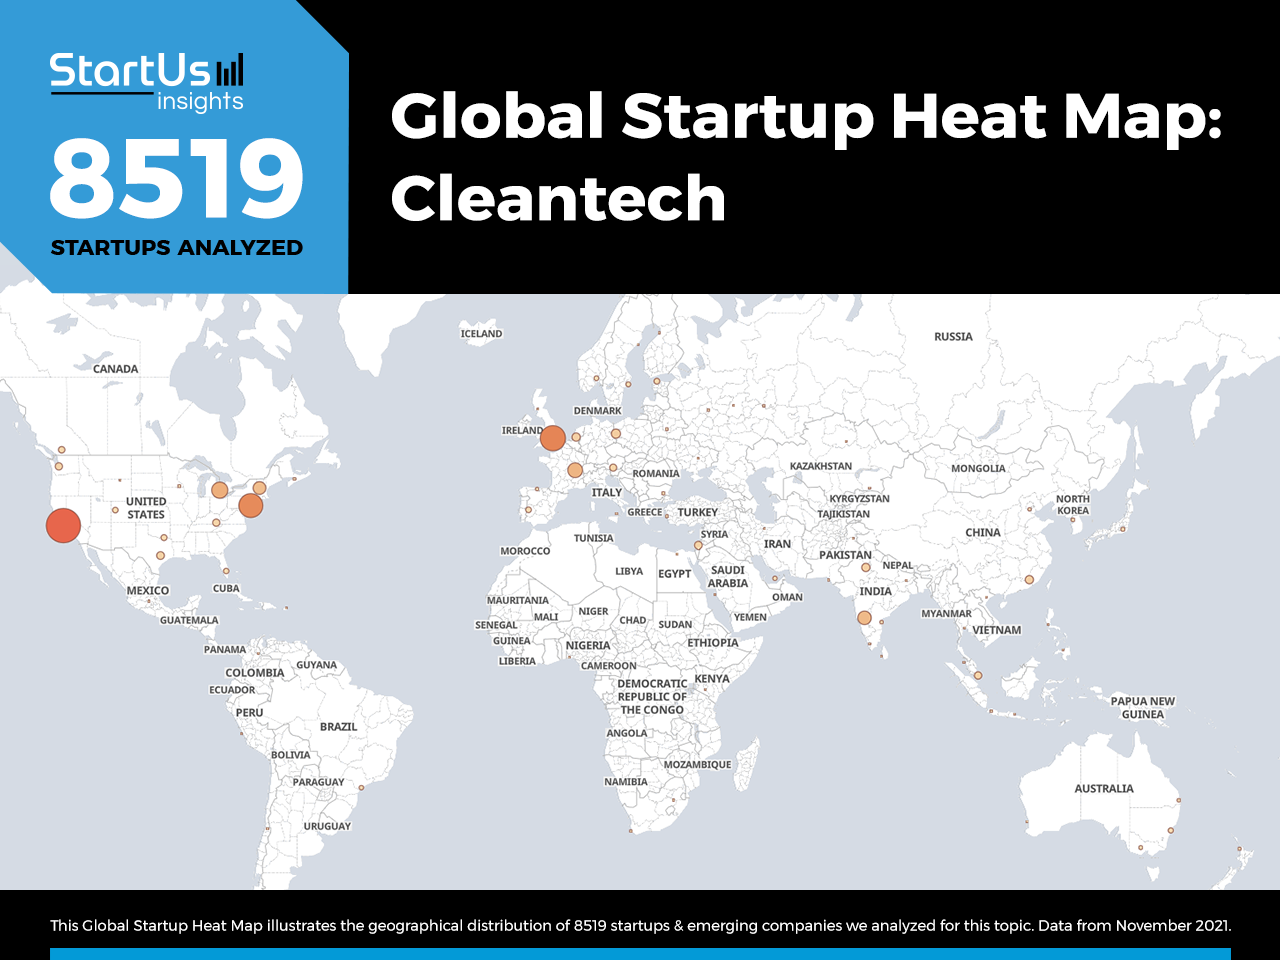 Cleantech-Trends-Research-Startups-Heat-Map-StartUs-Insights-noresize